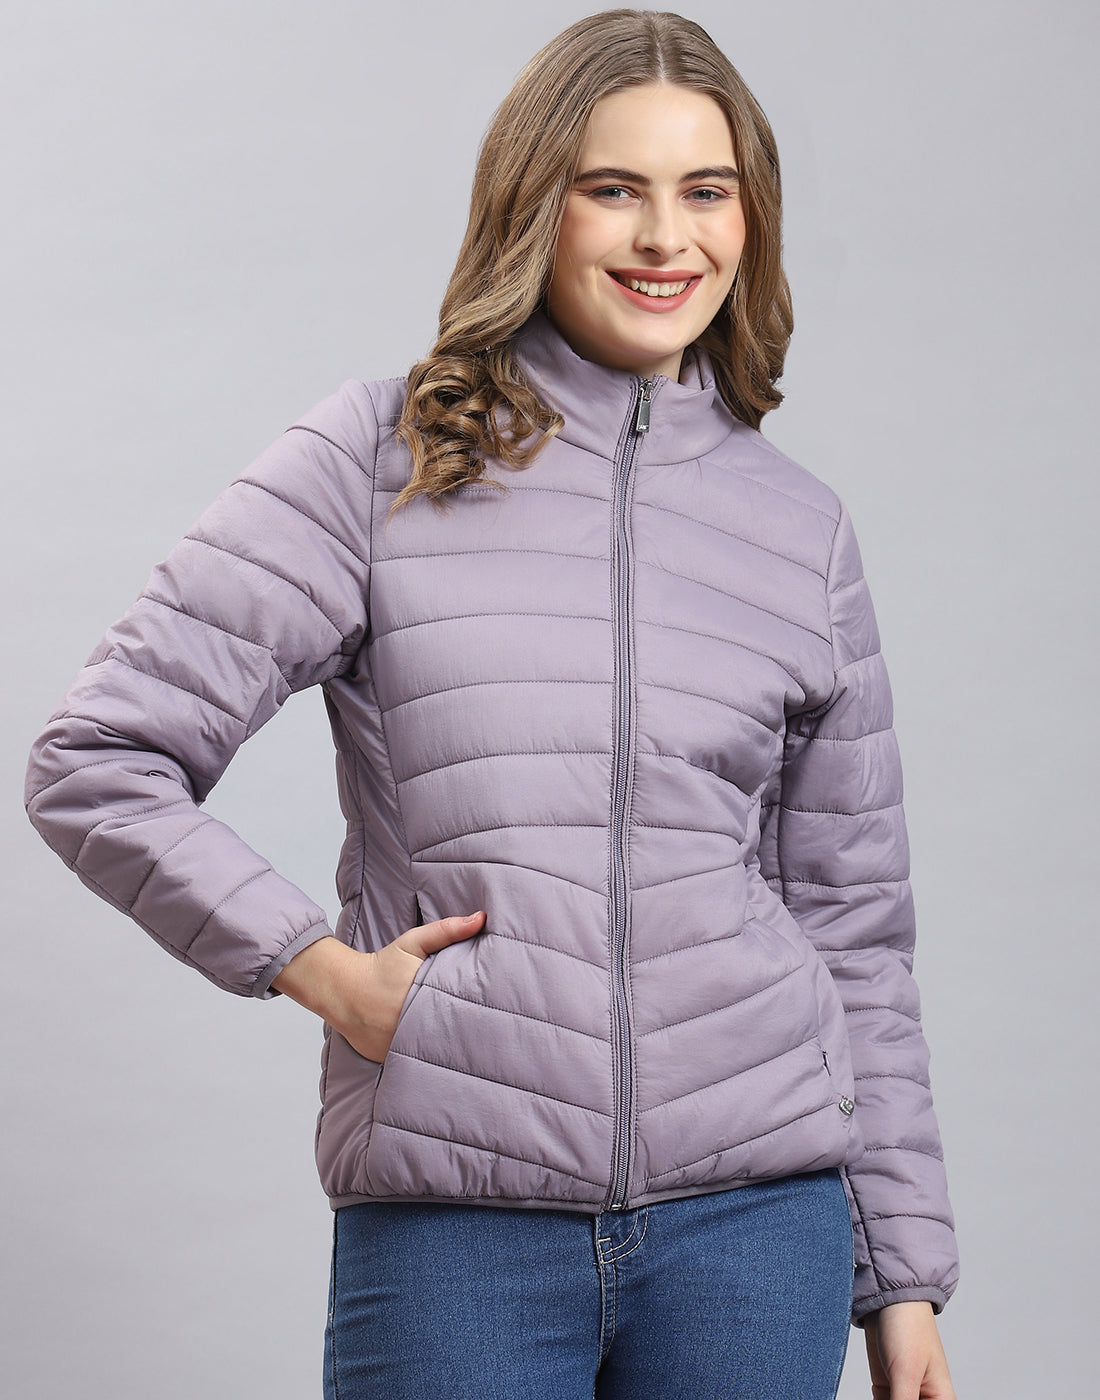 A Guide On How To Buy Winter Jackets For Womens Online